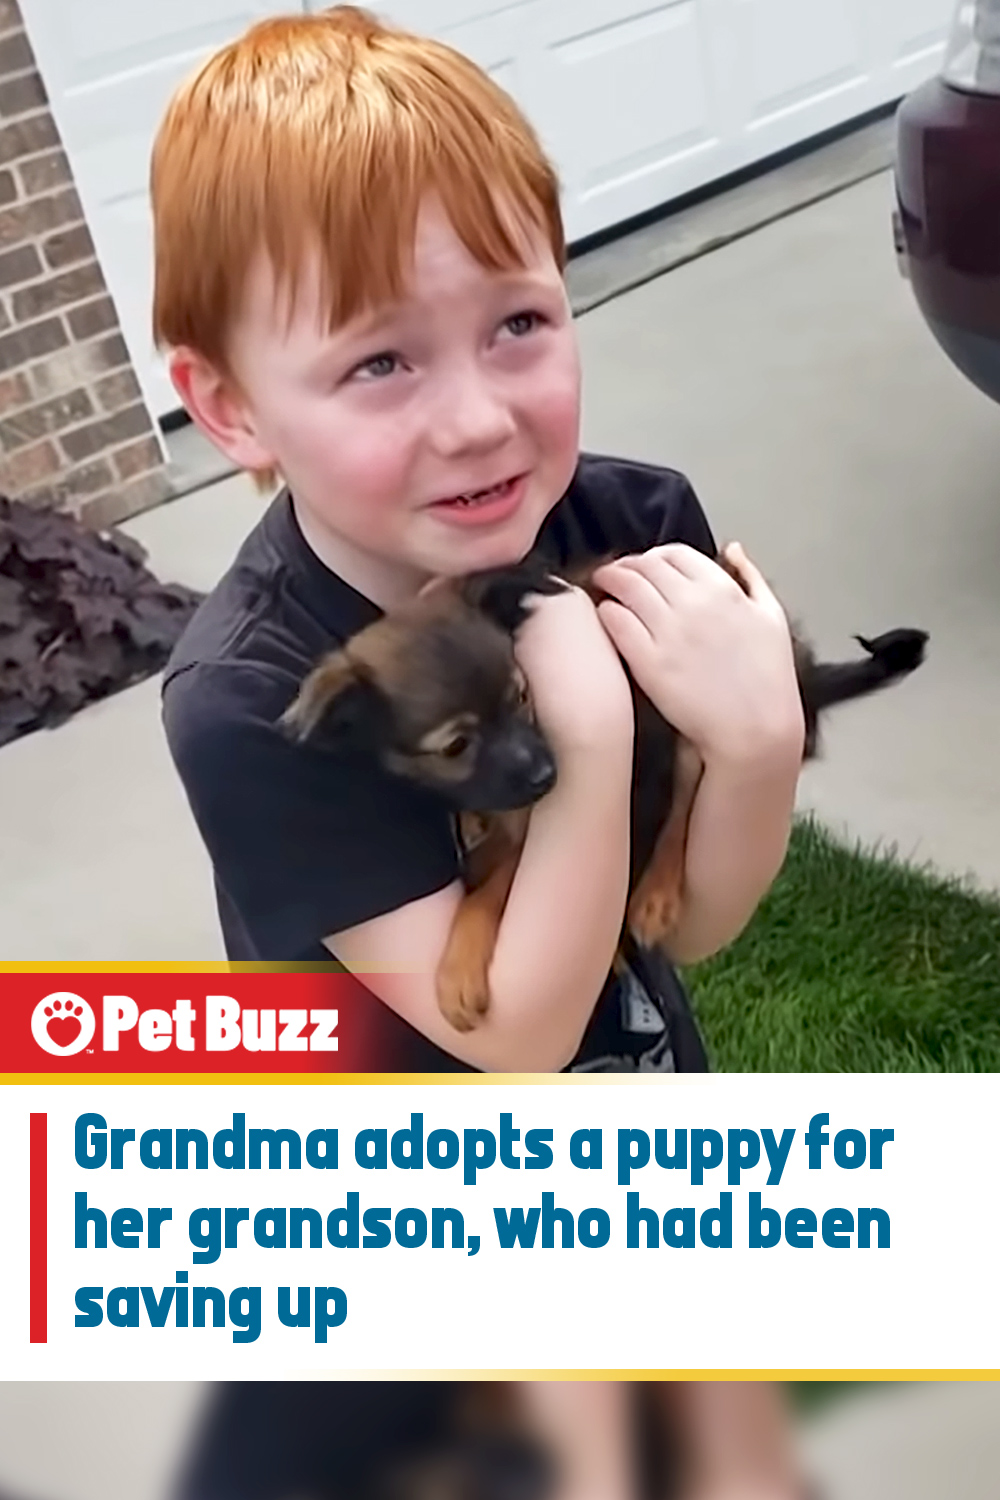 Grandma adopts a puppy for her grandson, who had been saving up